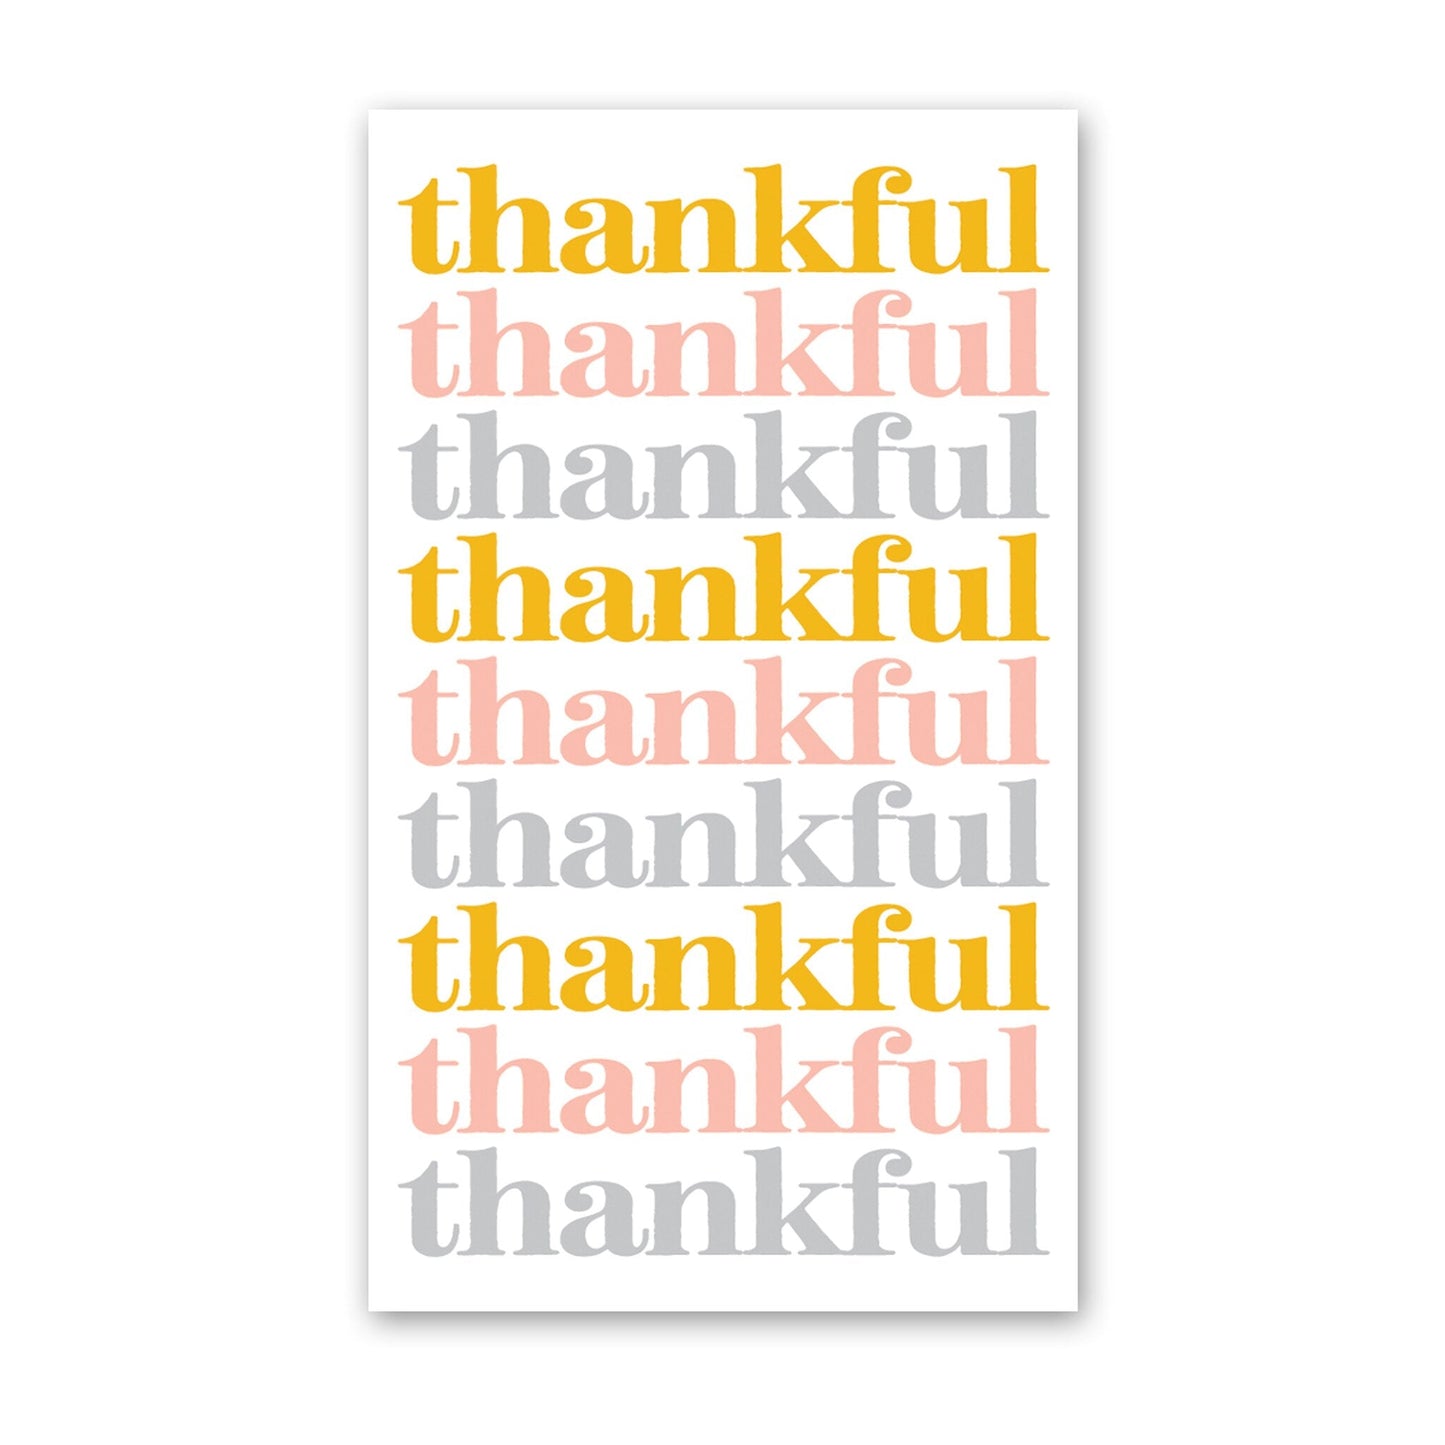 Mini Made Greeting Cards - FINAL SALE Home & Lifestyle Thankful Greeting Card